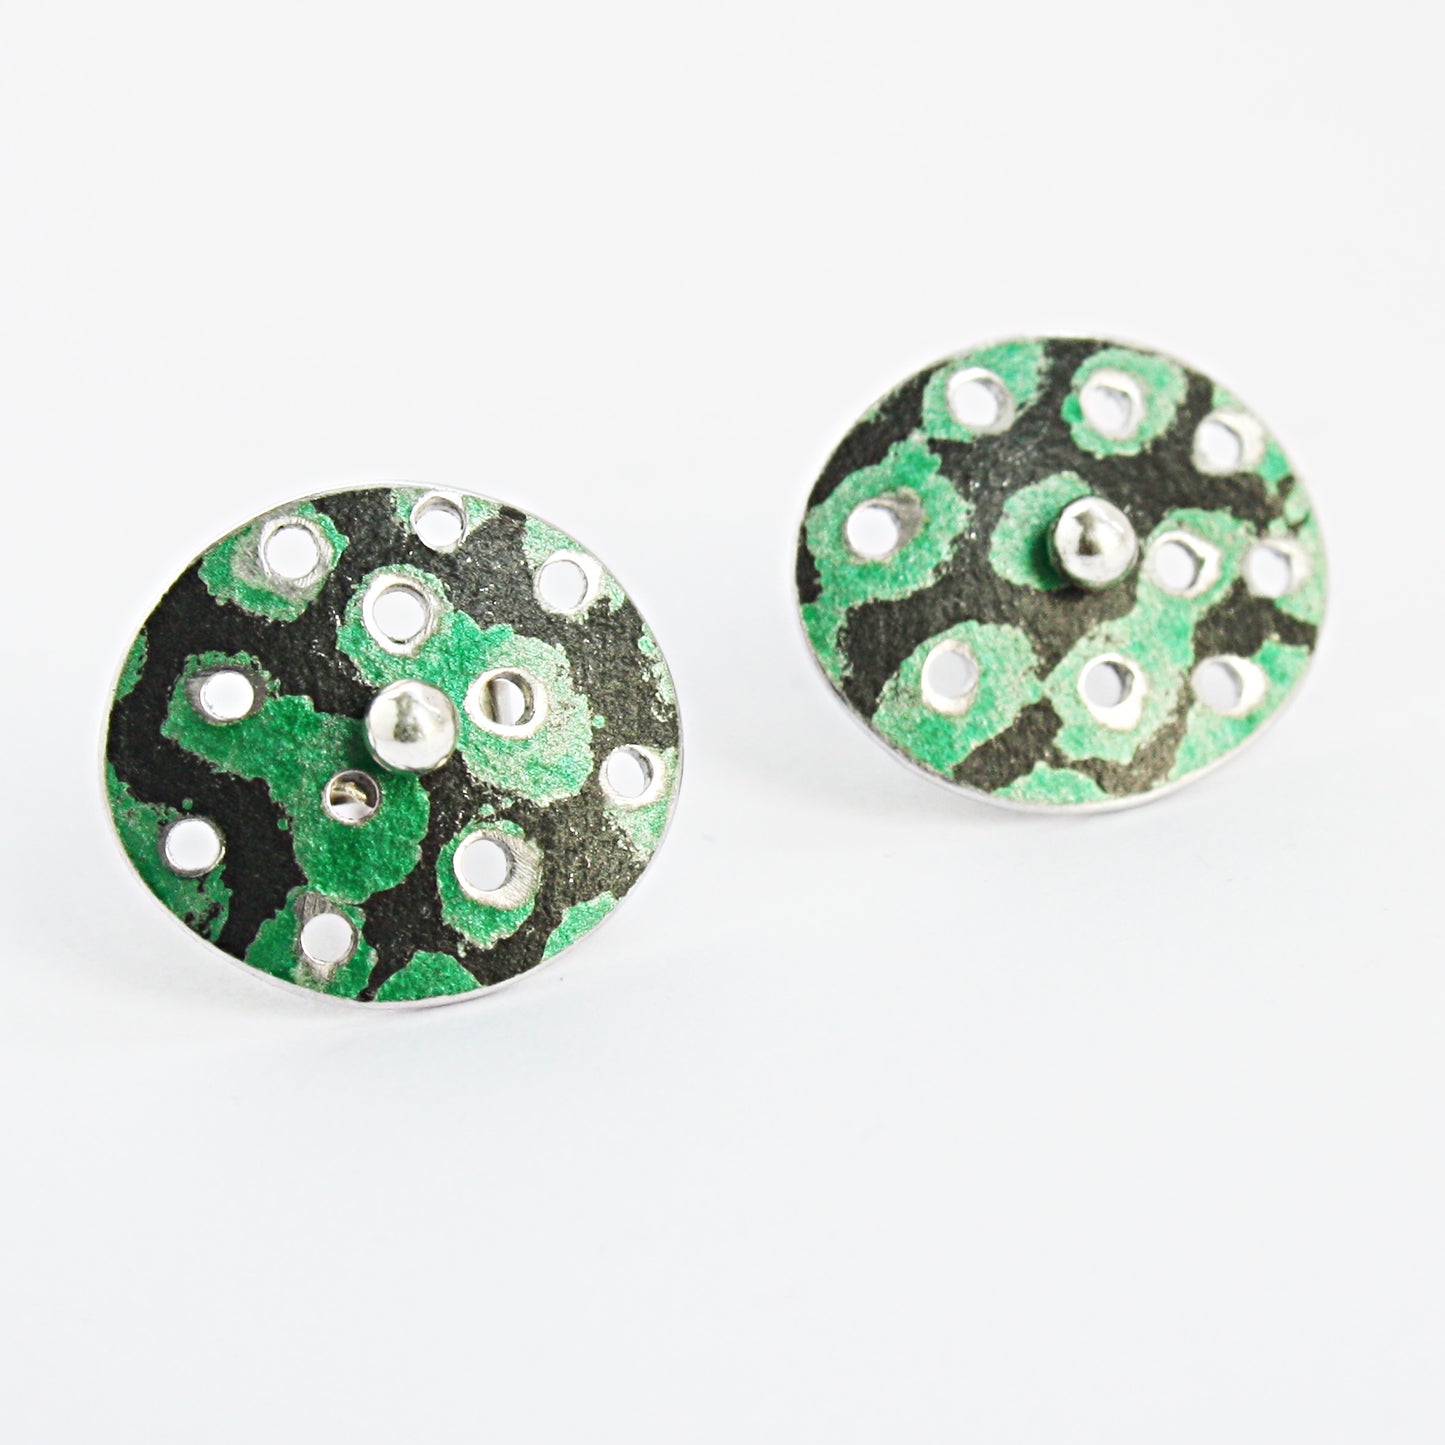 TS10 Perforated disc stud earrings